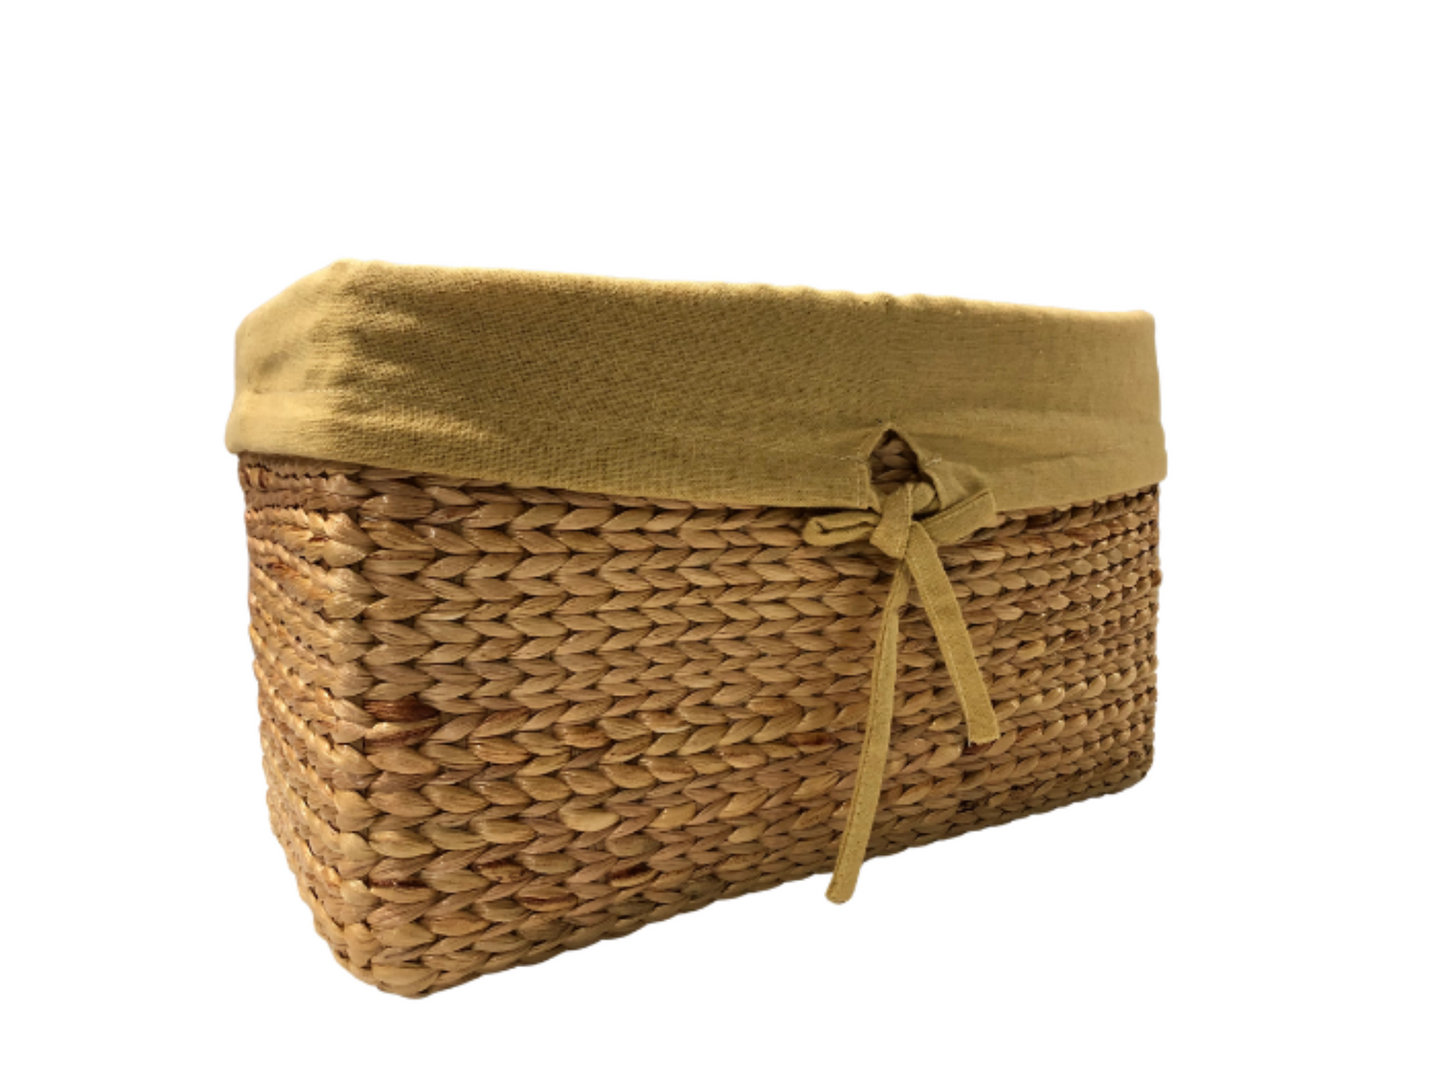 C600030029-Thailand pure handmade rattan small bag (without handle ribbon)